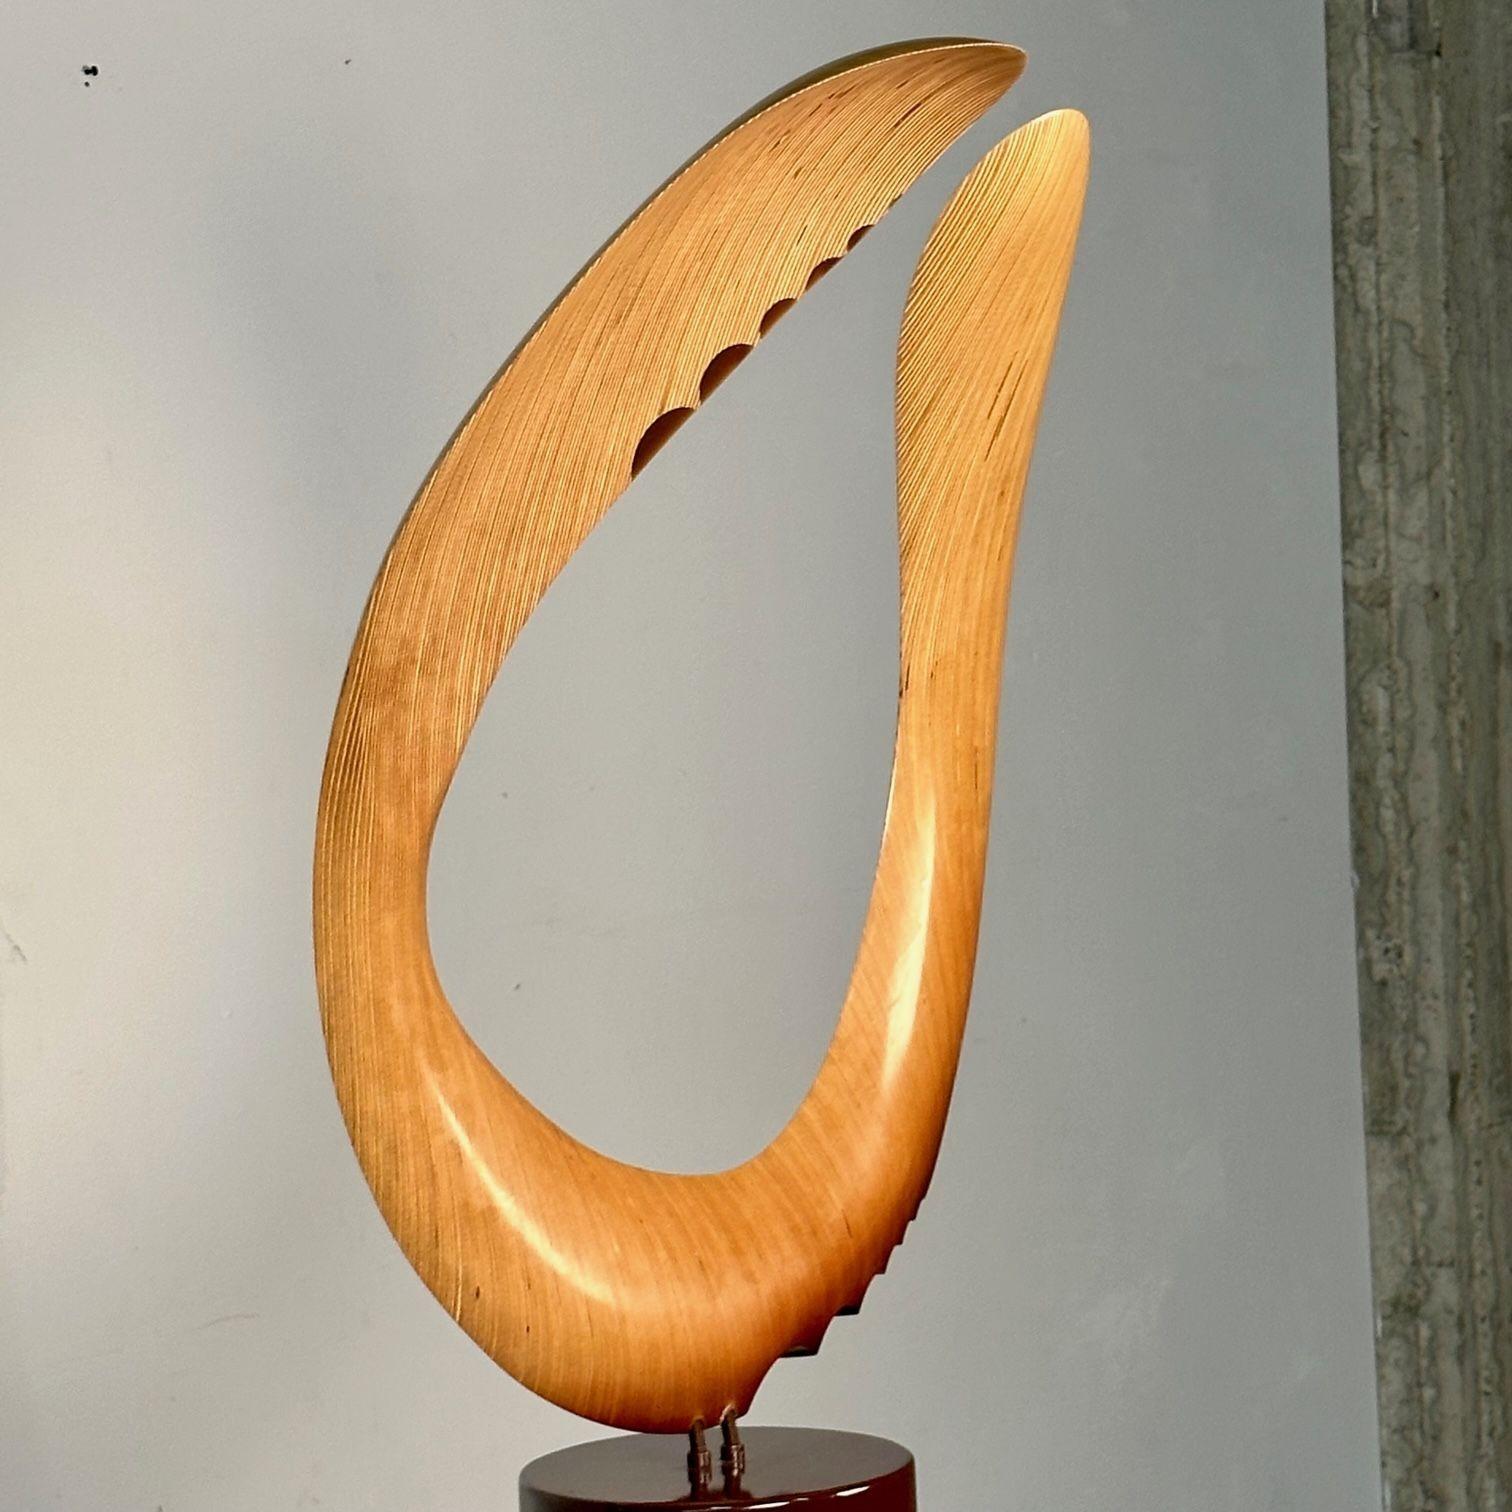  David Hymes, Contemporary, Boomerang Sculpture, Plywood, Steel Pedestal, 2010s For Sale 4